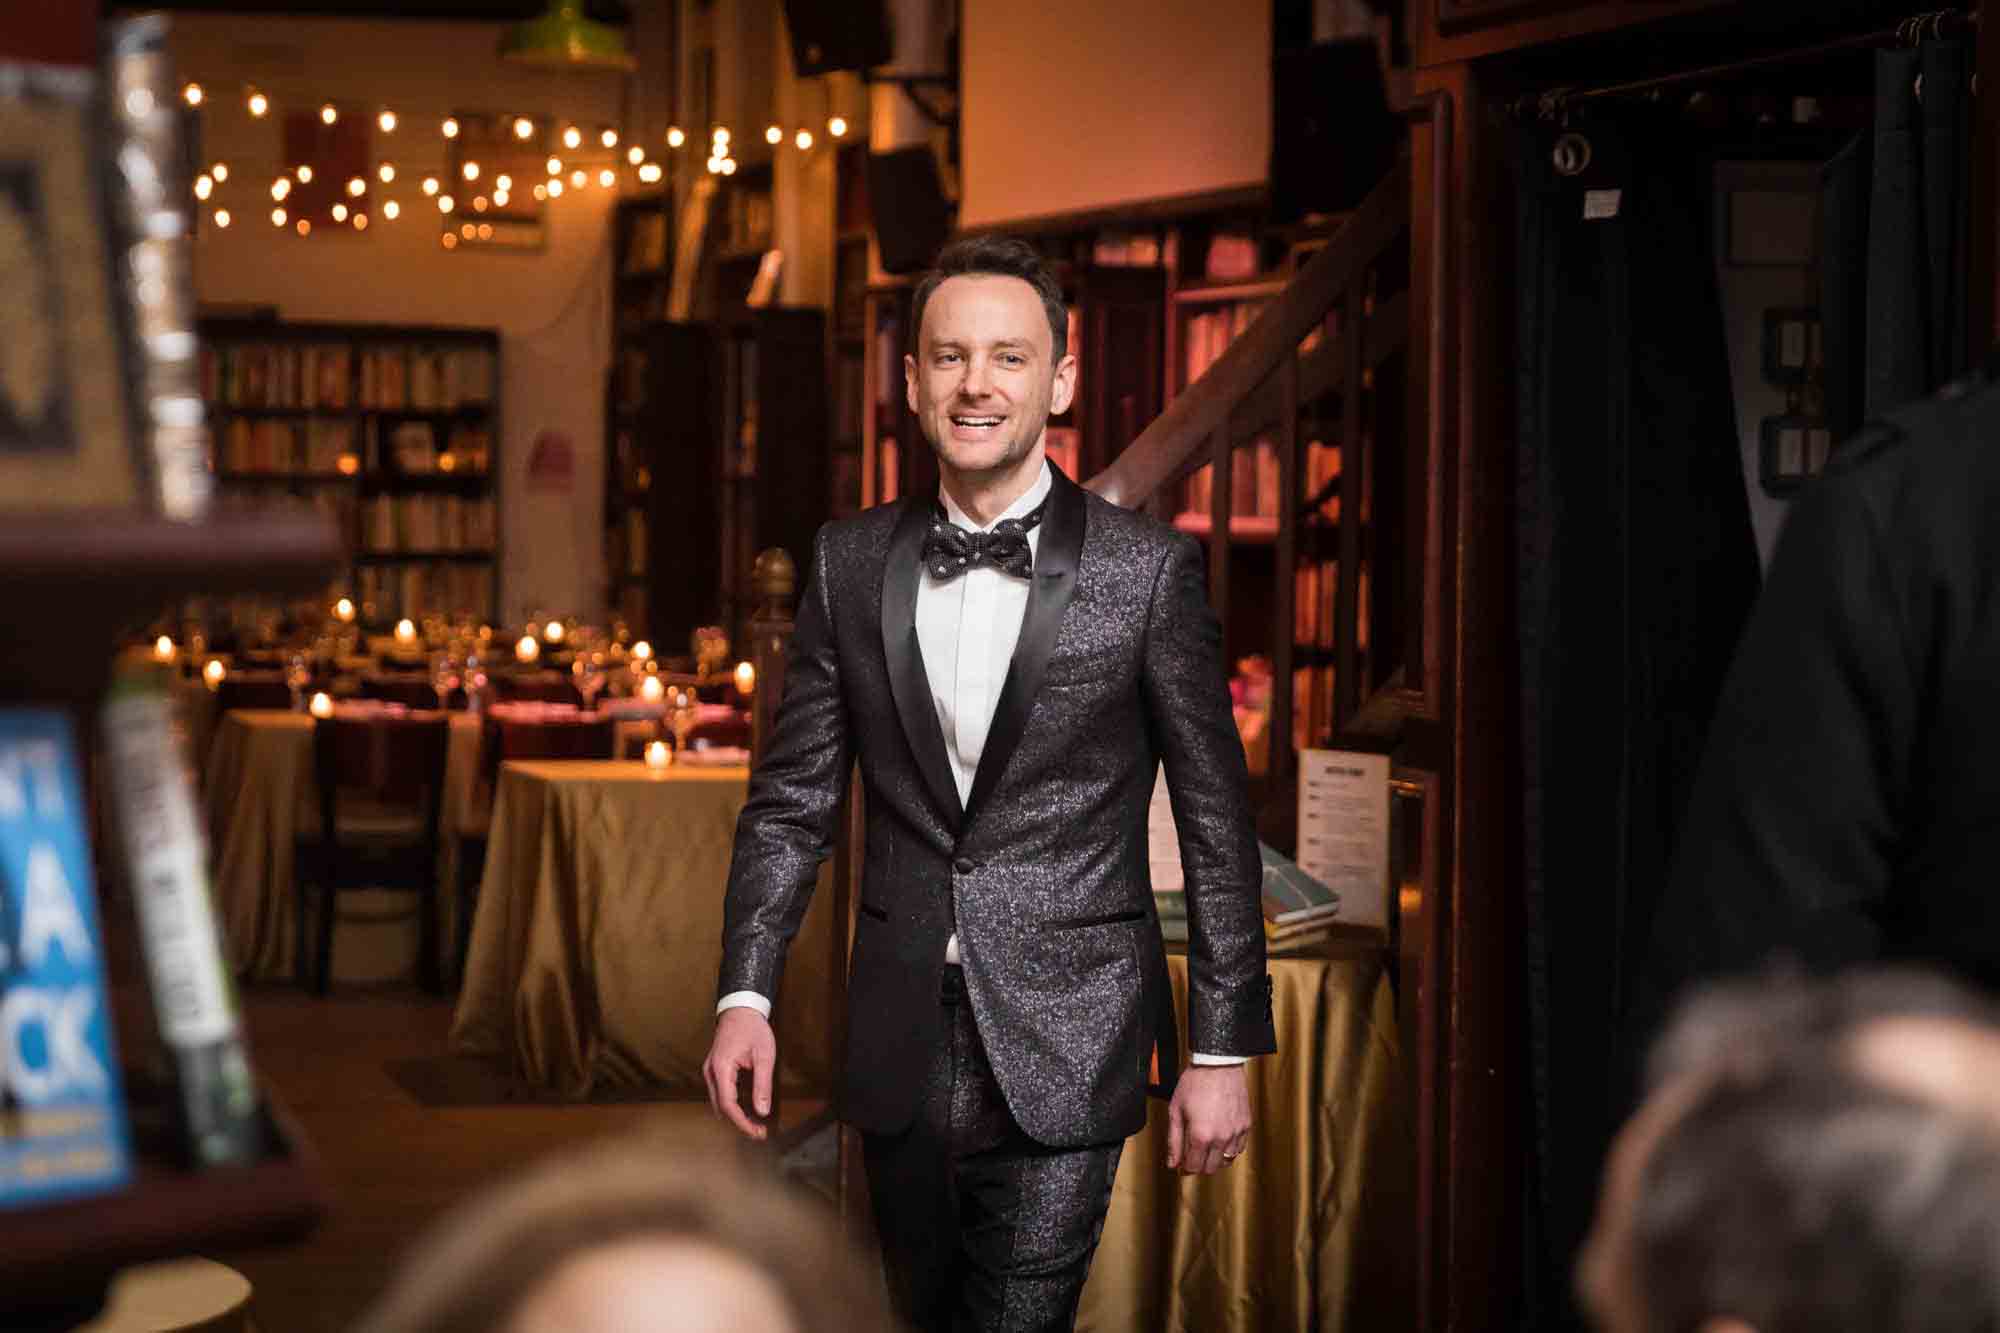 Groom walking down the aisle for an article on wedding ceremony photo tips